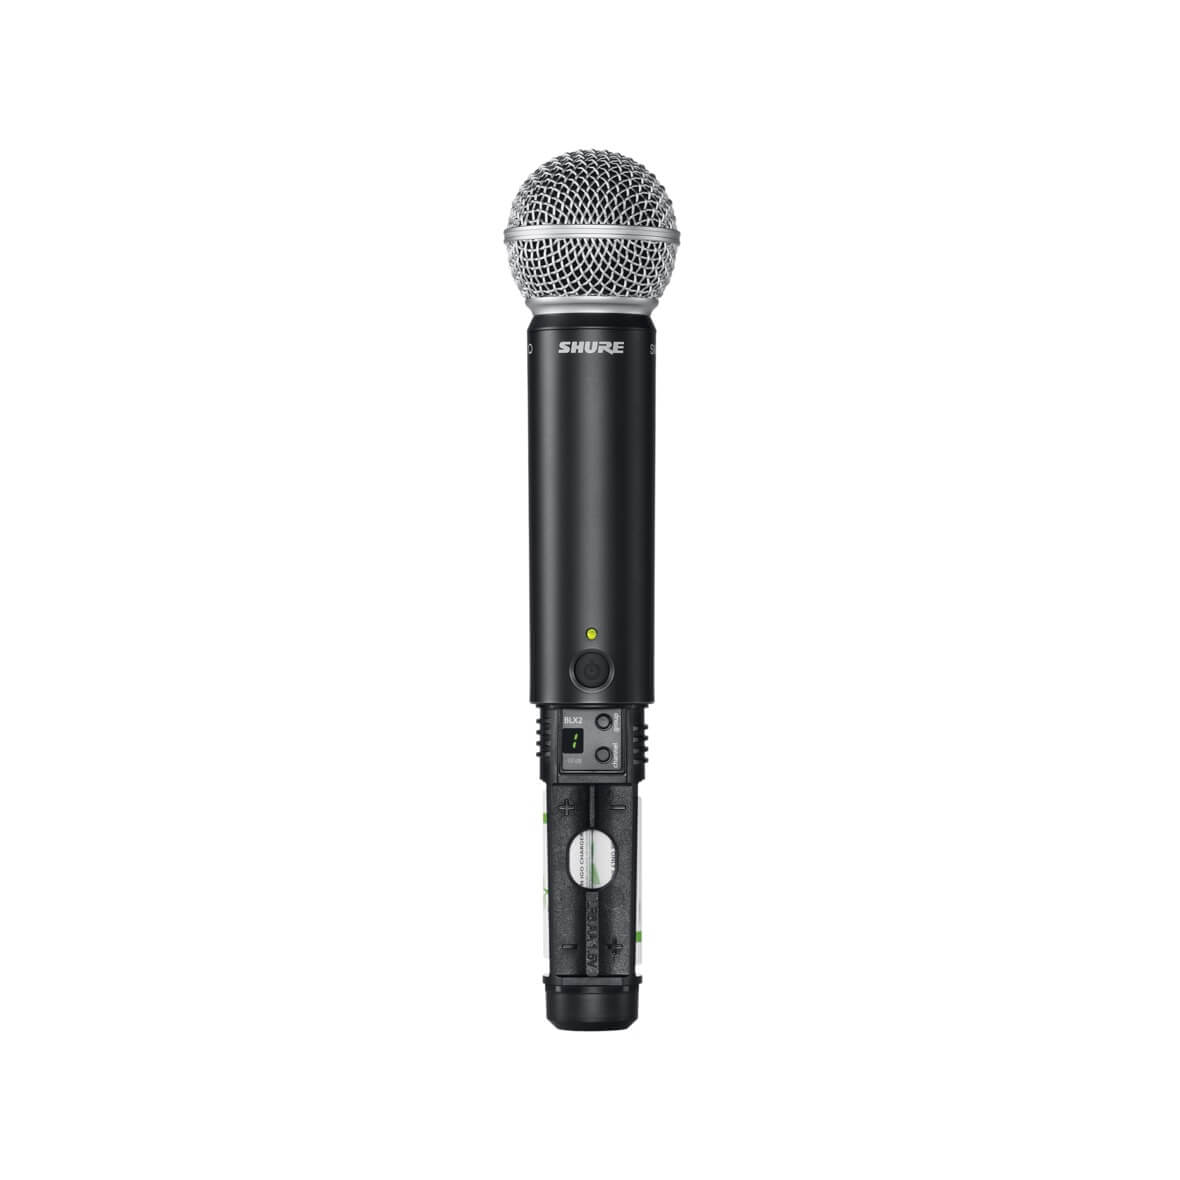 Shure BLX2/SM58 - Handheld transmitter with SM58 capsule, open